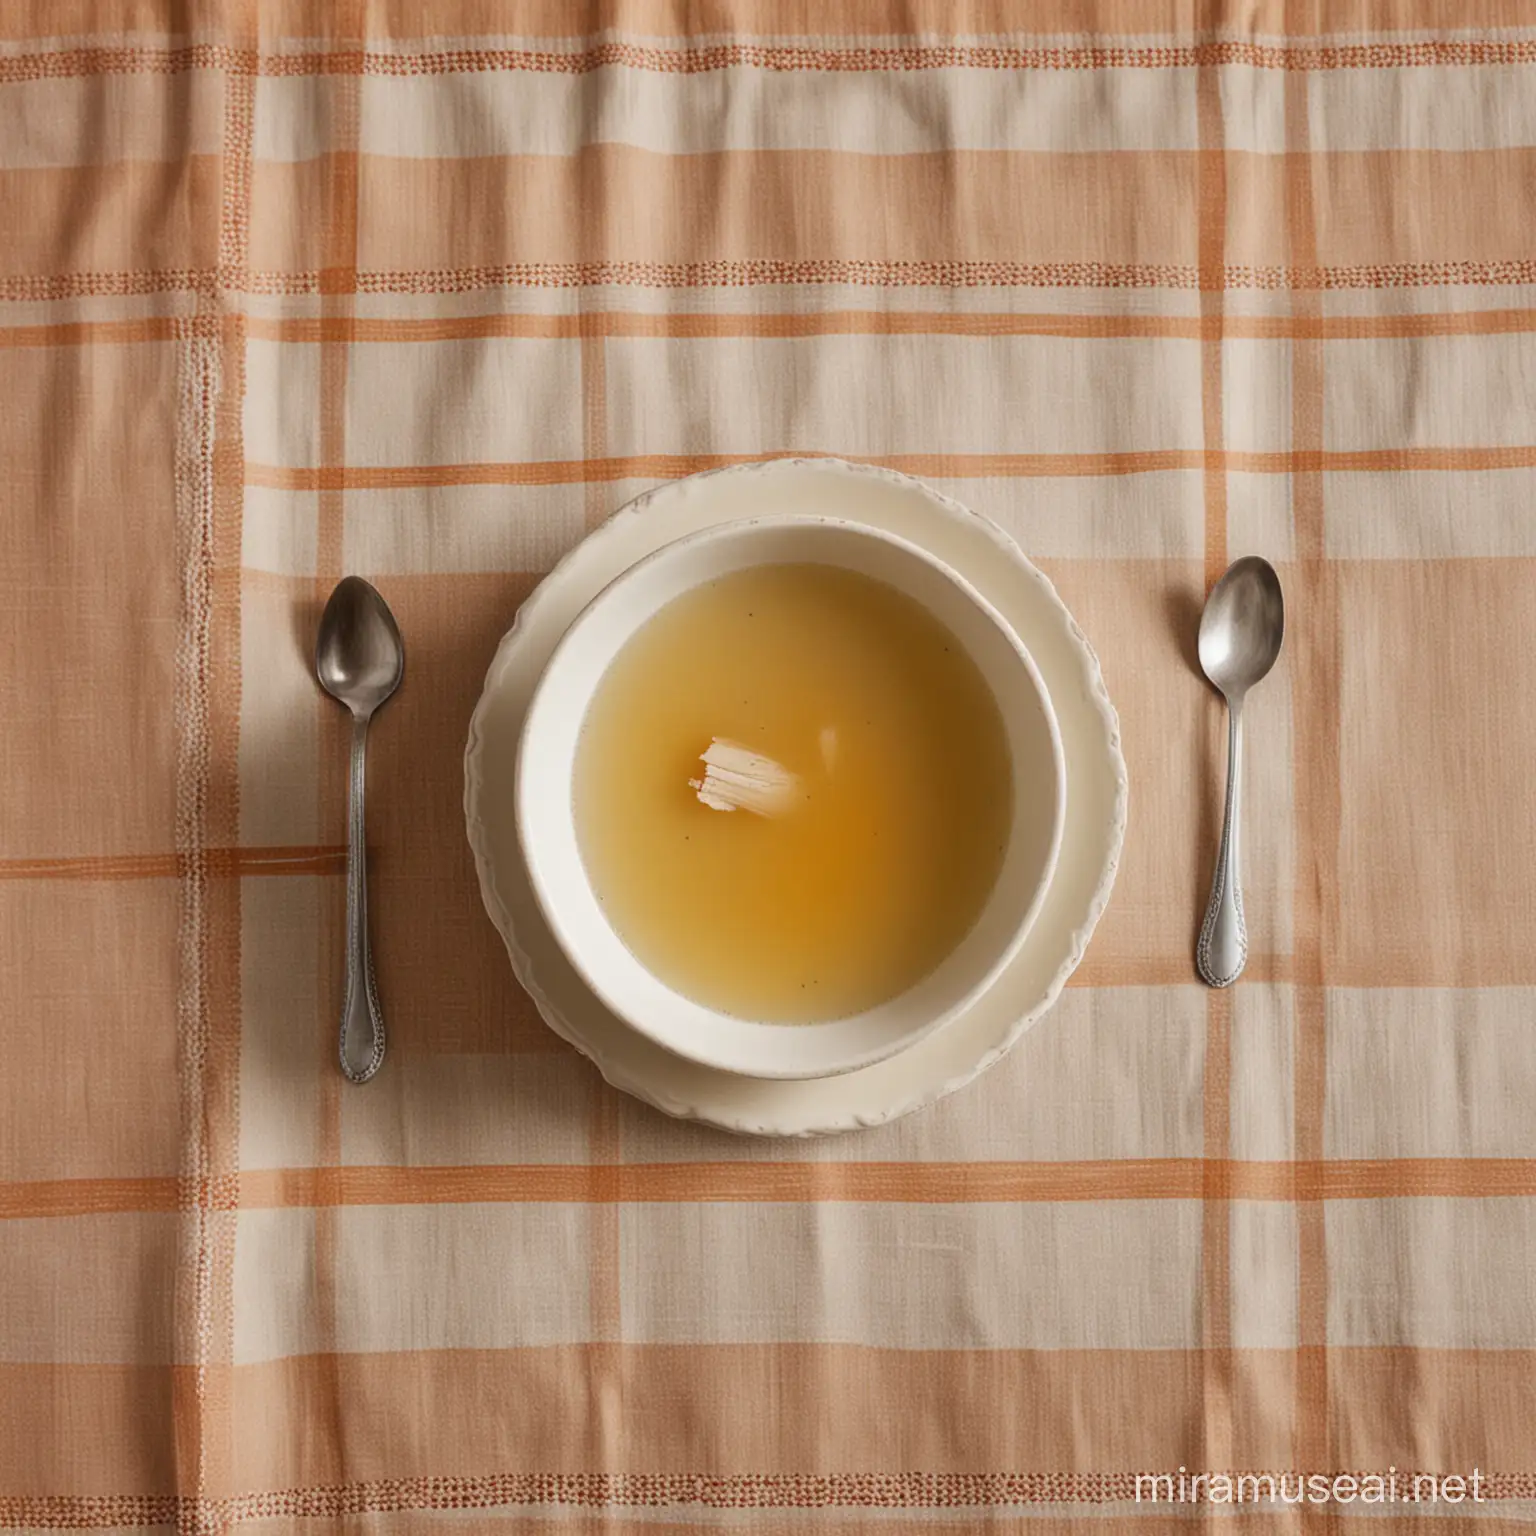 a bowl of Chicken Broth on a table with a nice tablecloth